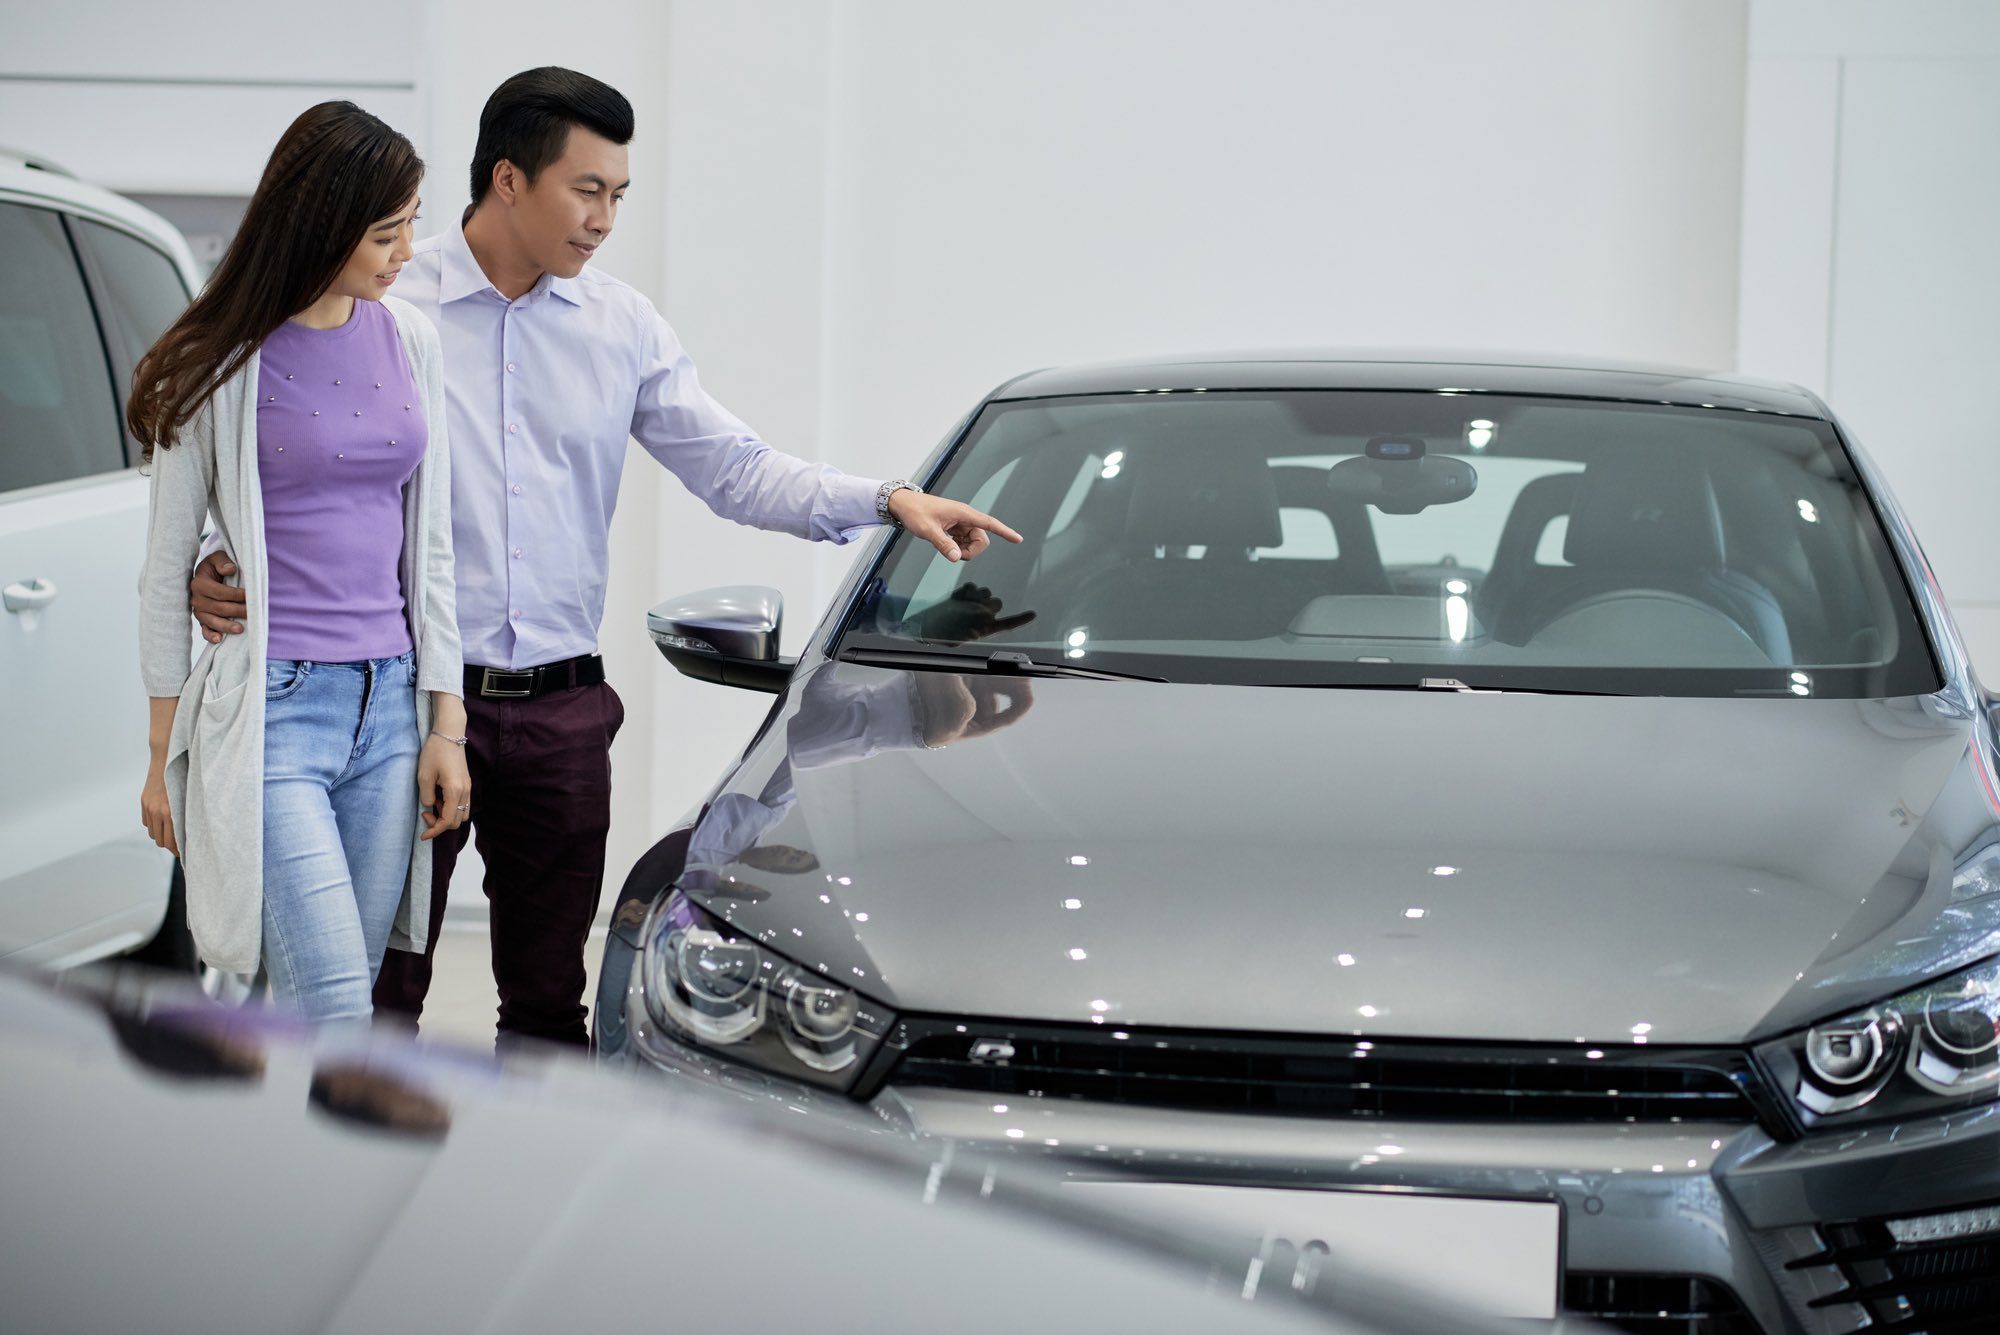 Buyers checking out a car before purchase